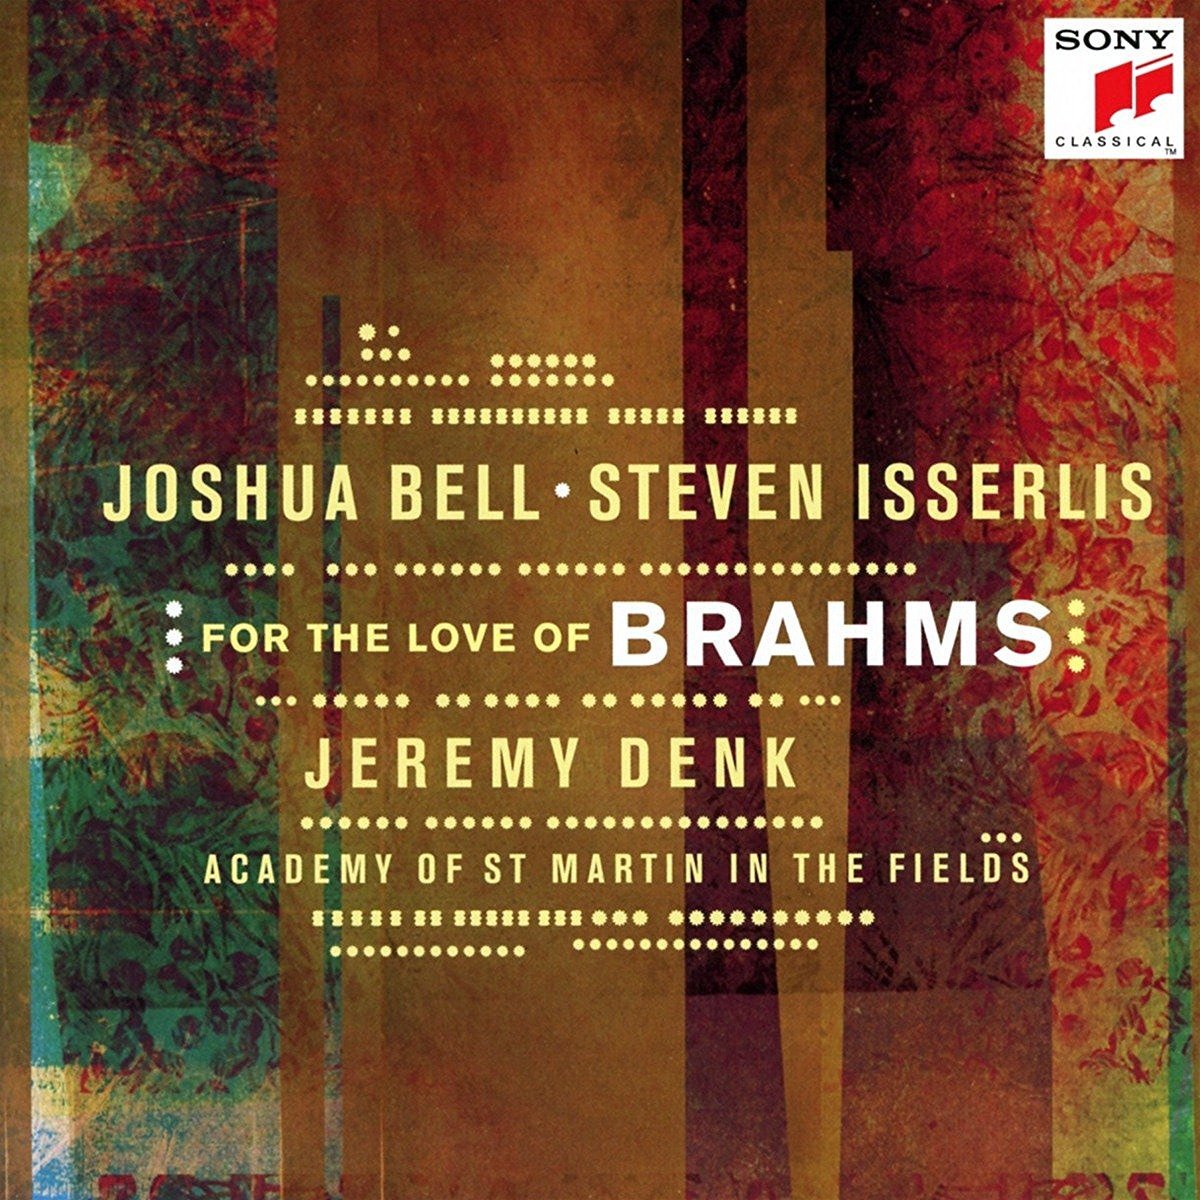 FOR THE LOVE OF BRAHMS - JOSHUA BELL, JEREMY DENK, STEVEN ISSERLIS, ACADEMY OF ST. MARTIN IN THE FIELDS